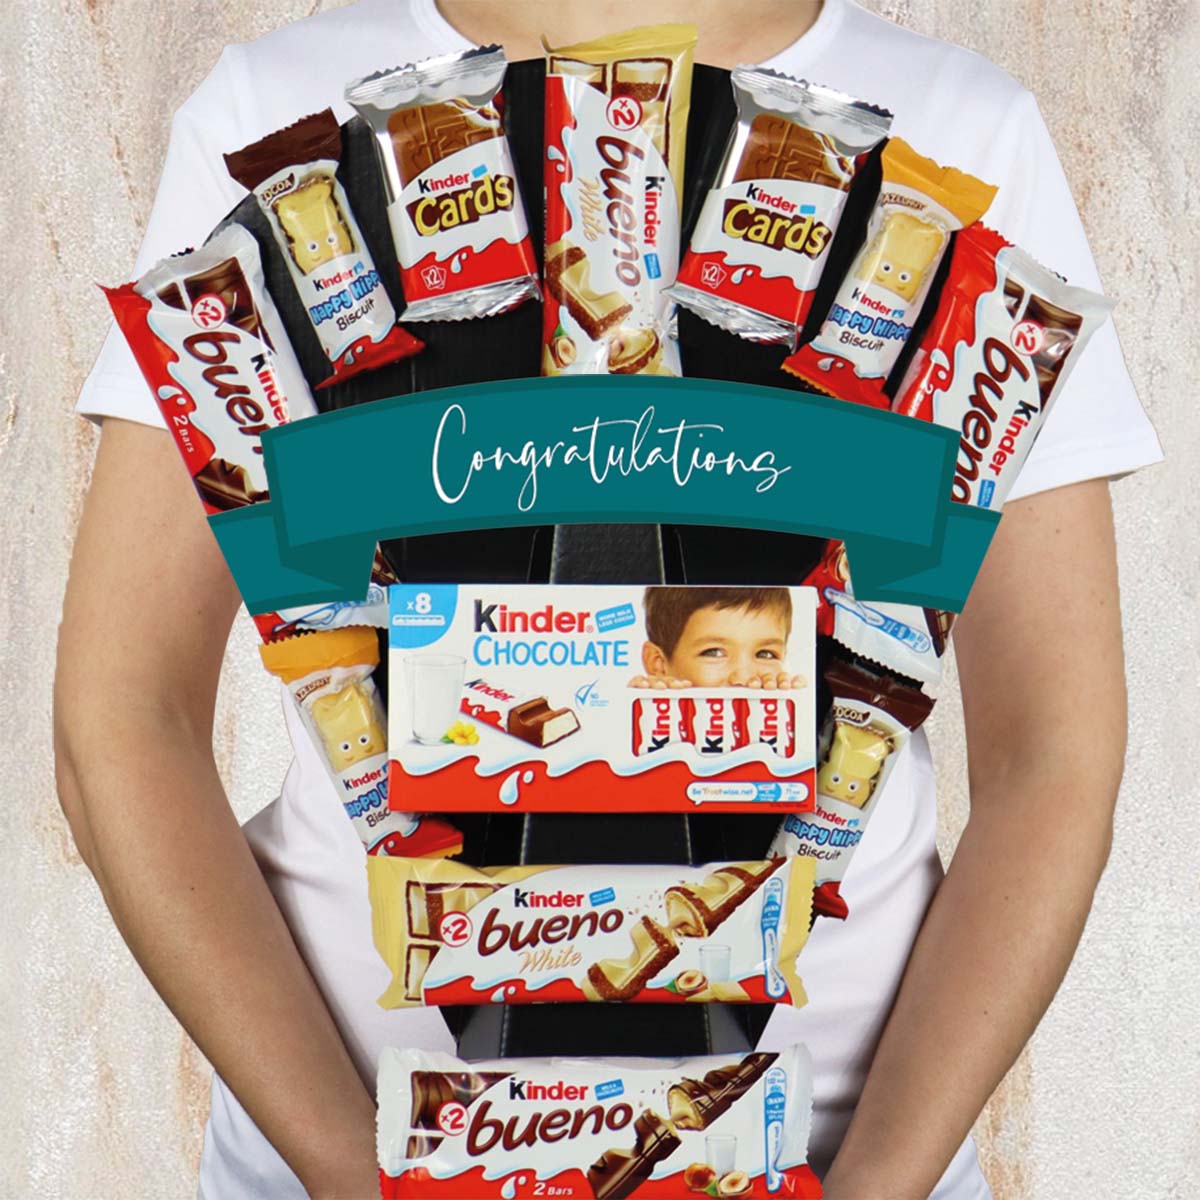 Large Kinder Congrats Chocolate Bouquet with Bueno, Happy Hippos, Kinder Cards - Gift Hamper Box by HamperWell